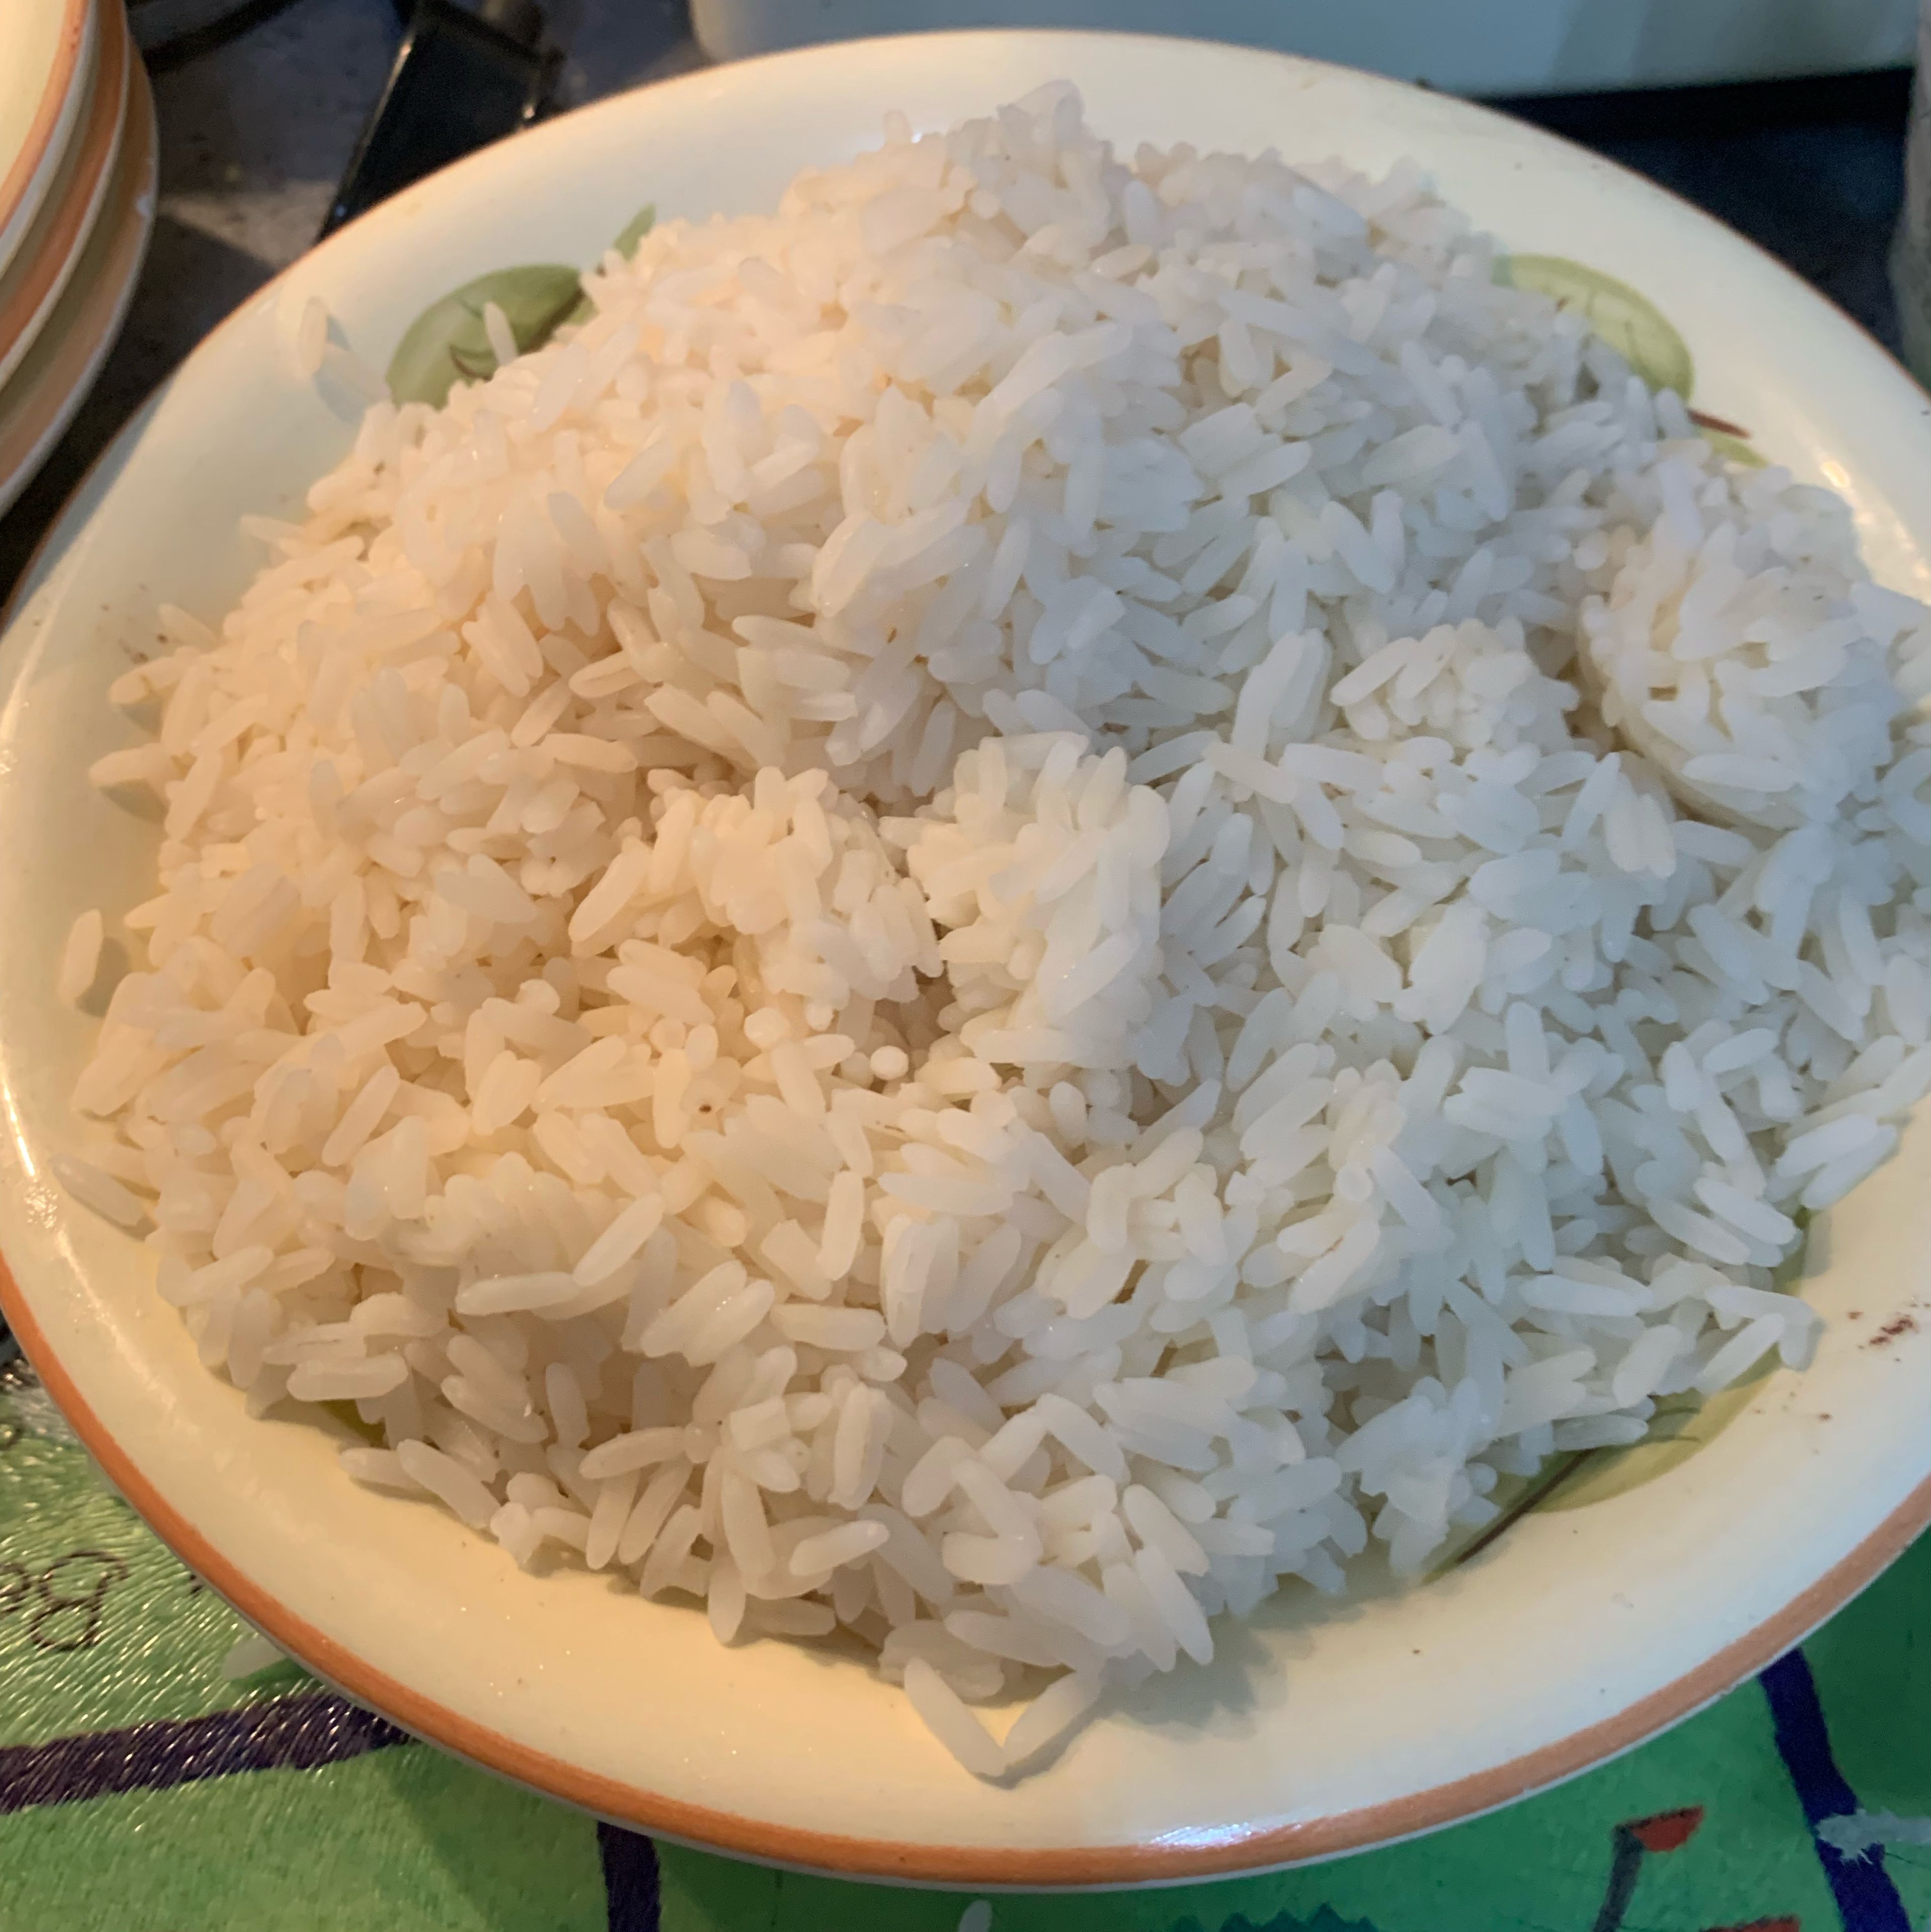 By this time the rice should be fully cooked. All you have to do is cut the bags open and get the rice out for it to dry out. You can season it with some salt, parsley or garlic granules - all depends on your preference. Dish up the rice on 4 separate plates/bowls. 